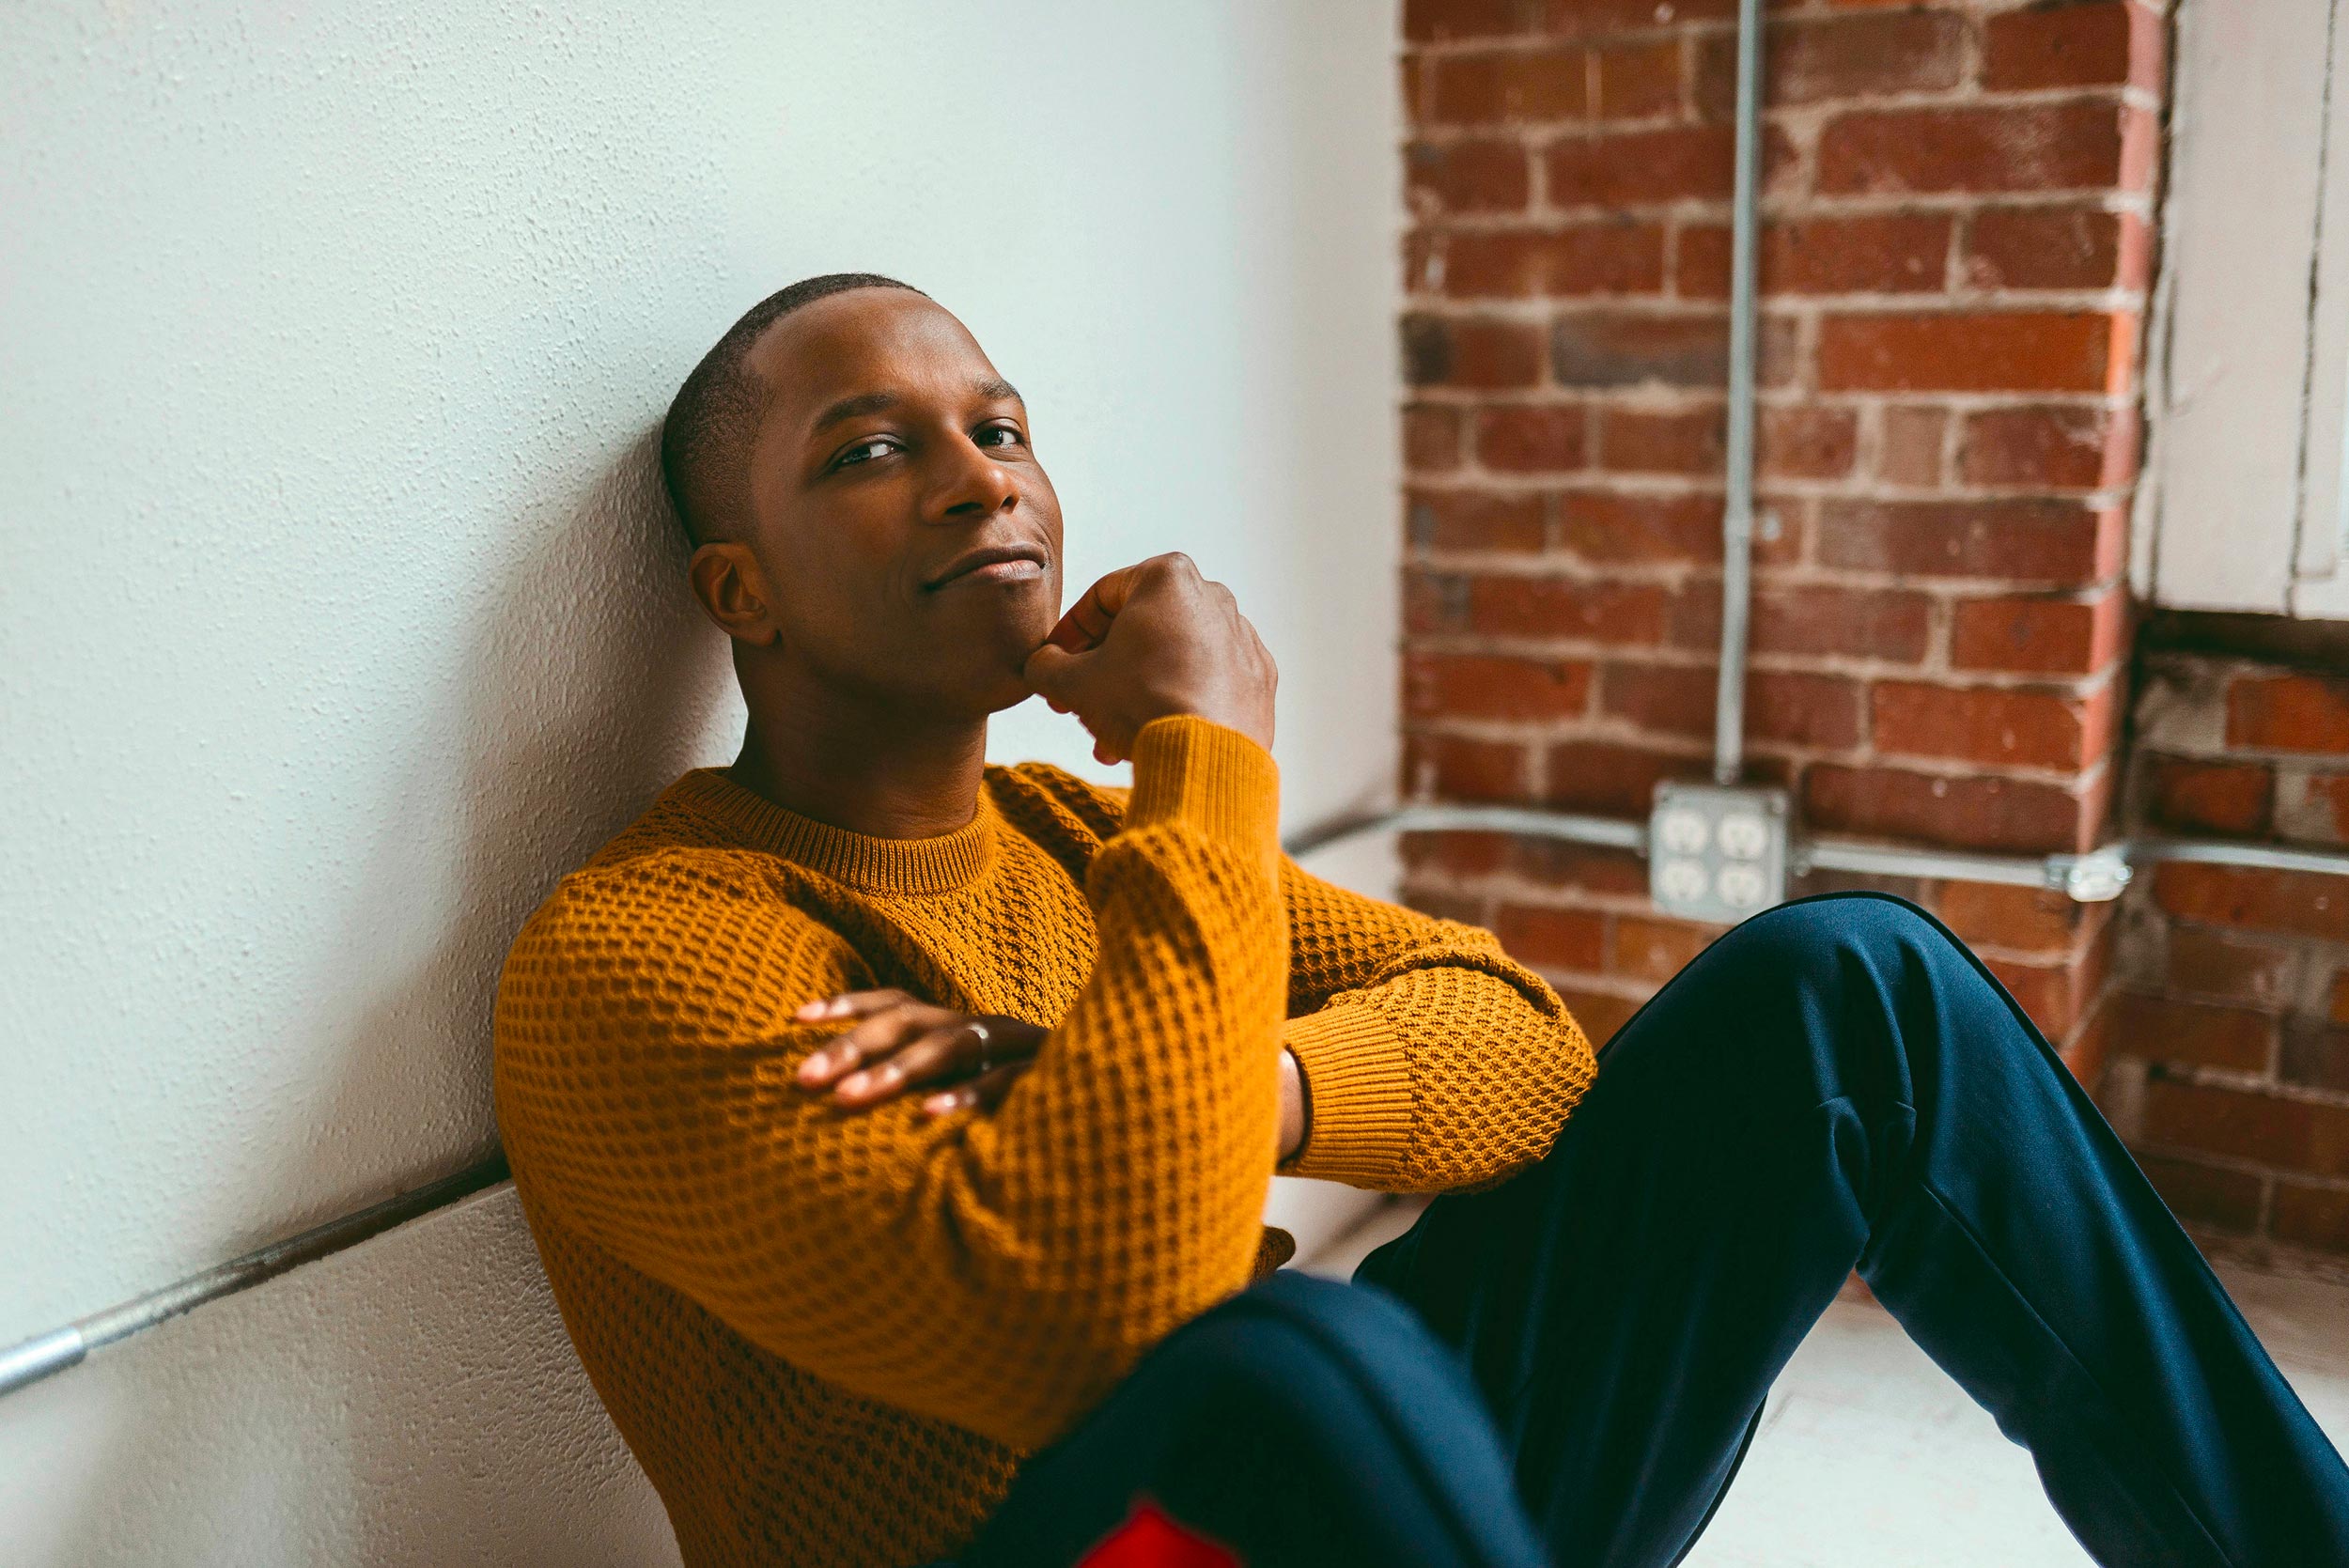 Leslie Odom Jr. sits on the floor looking at the camera